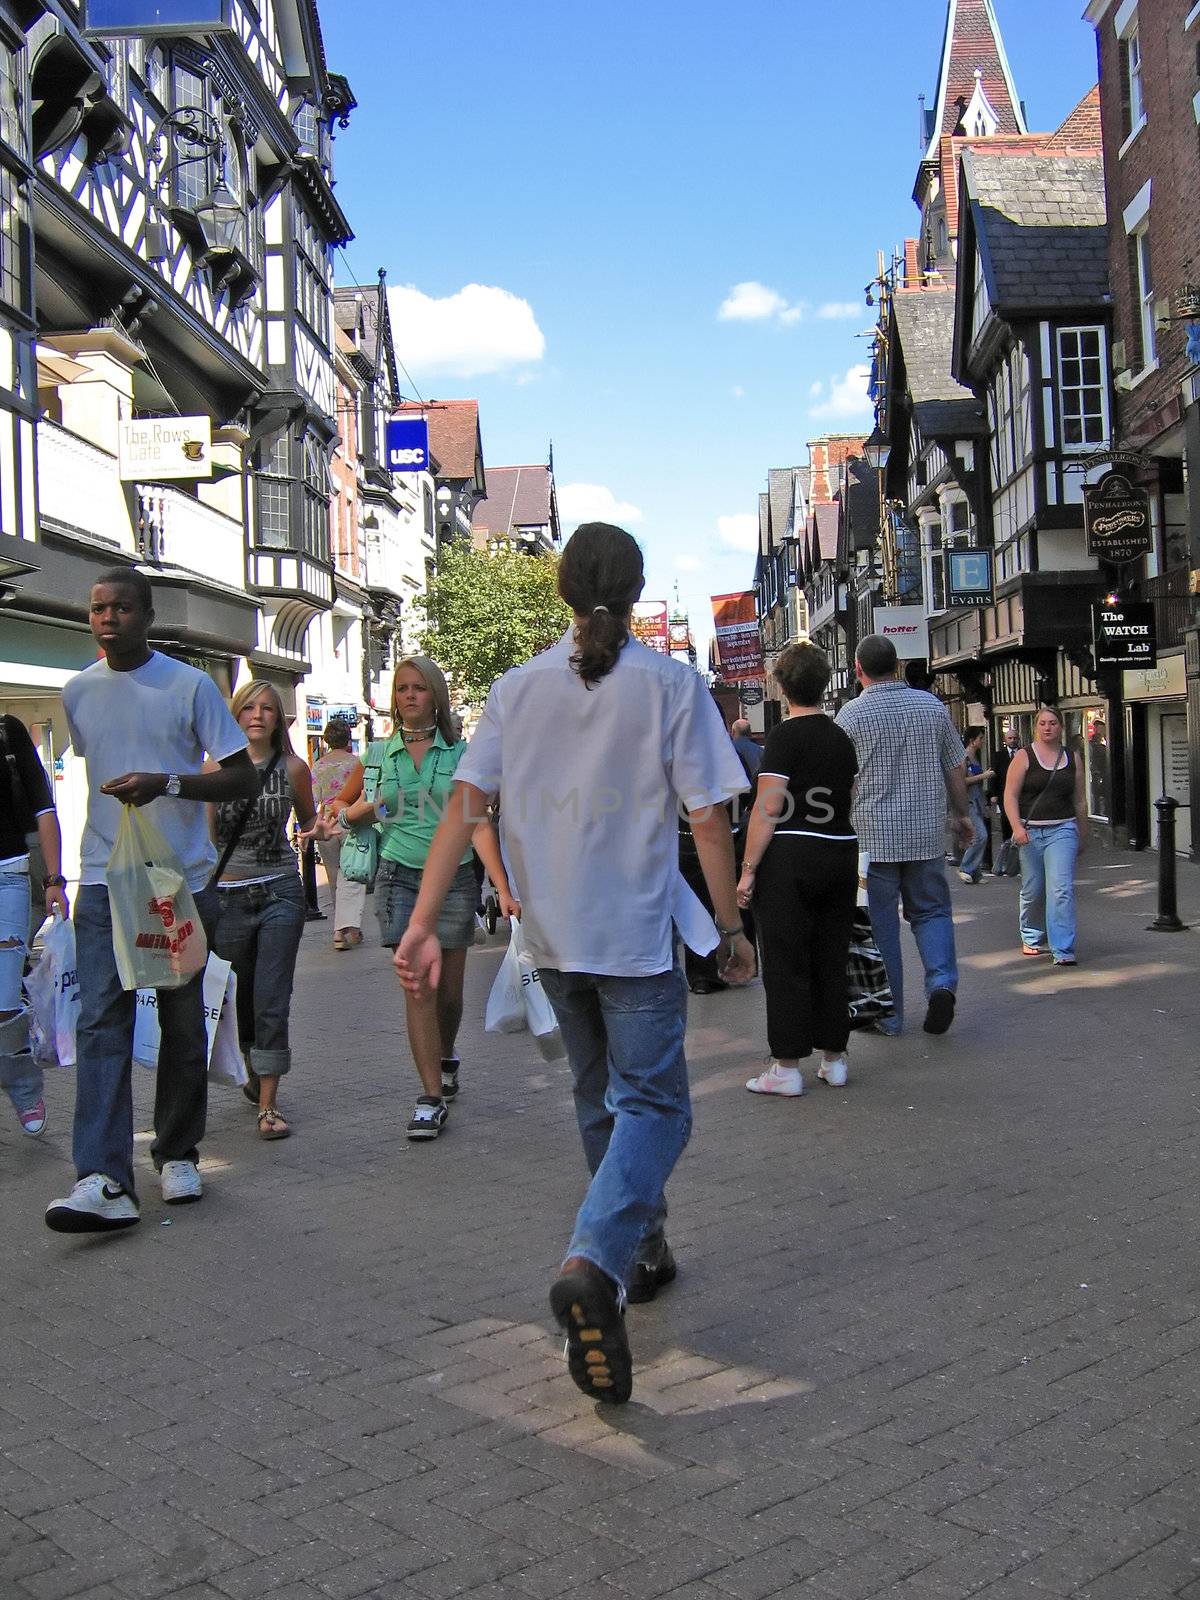 Tourists Shopping in Chester UK by green308